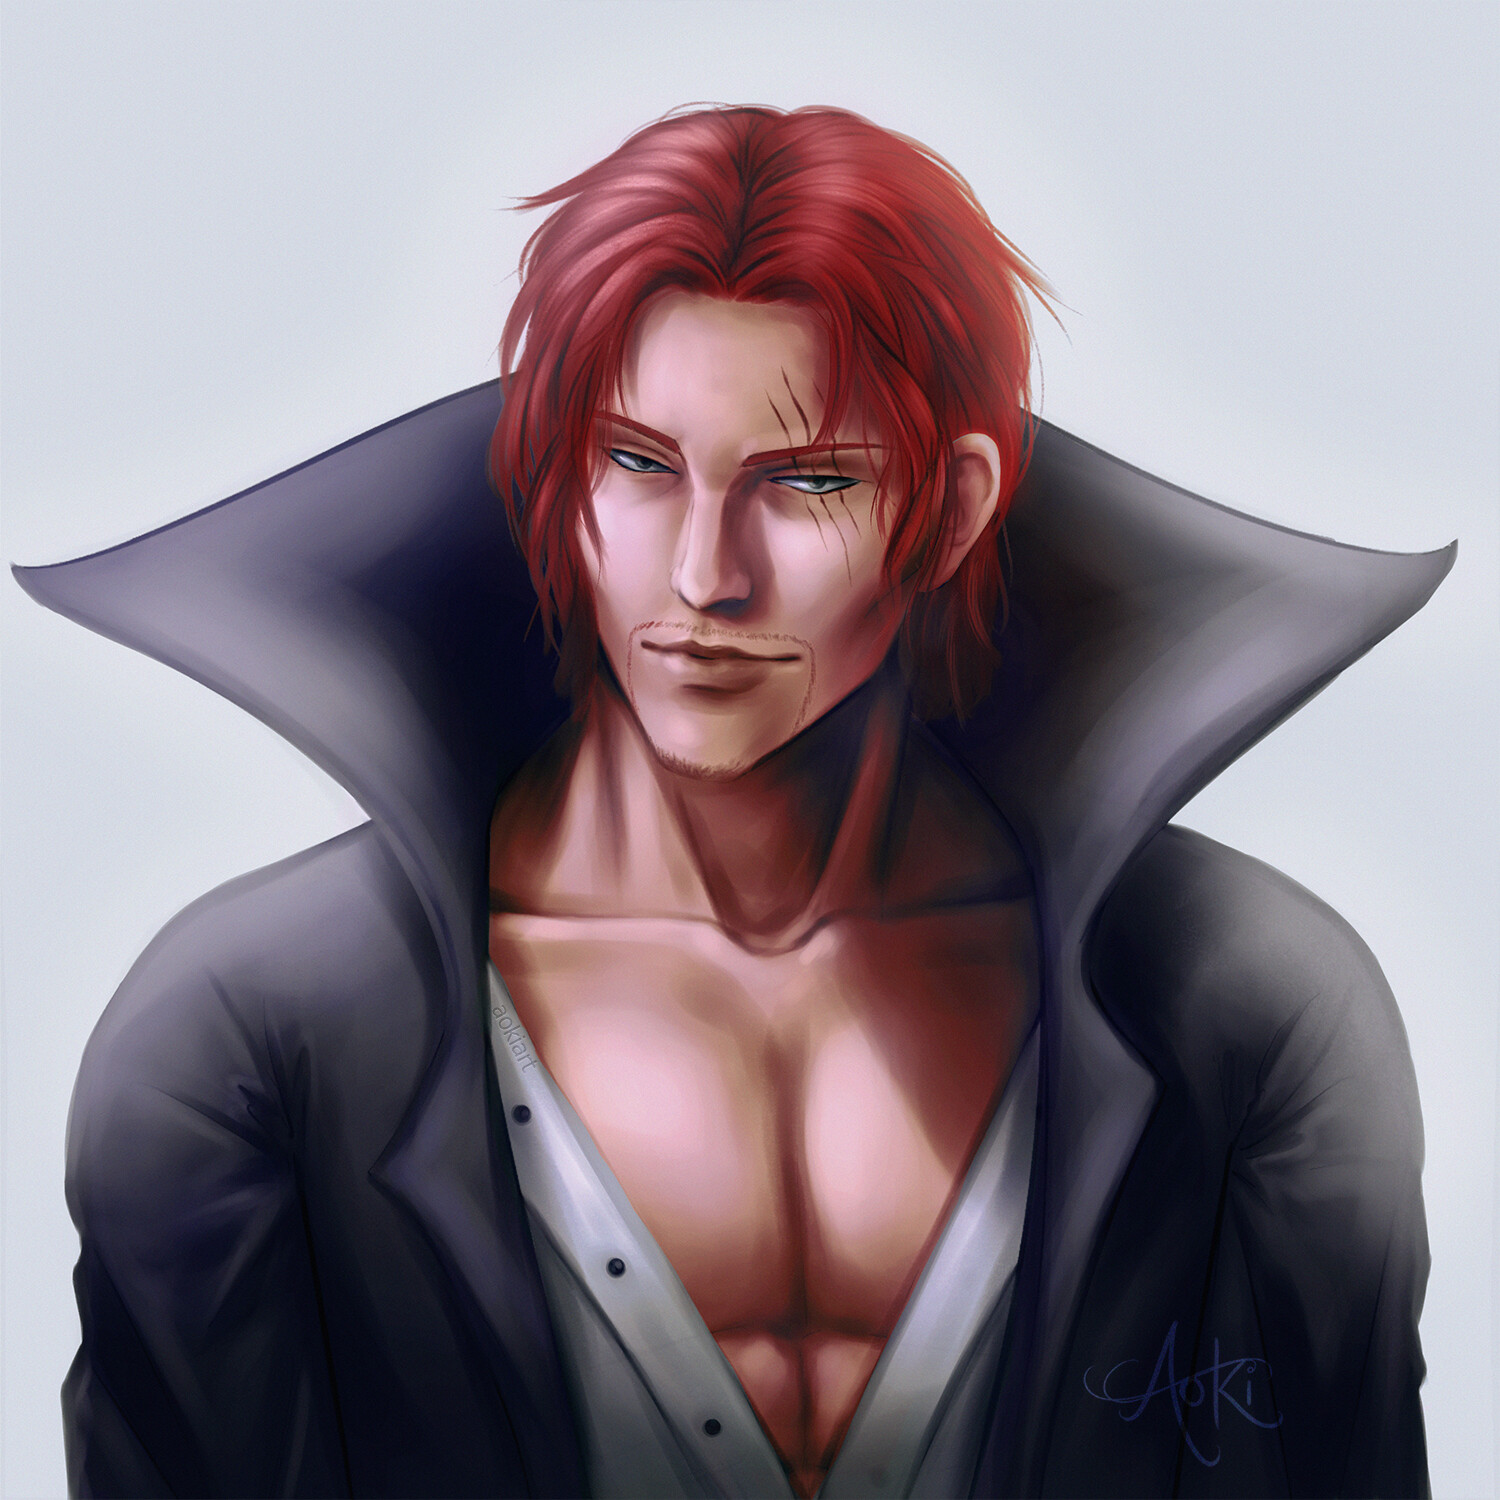 ArtStation - Shanks from one piece